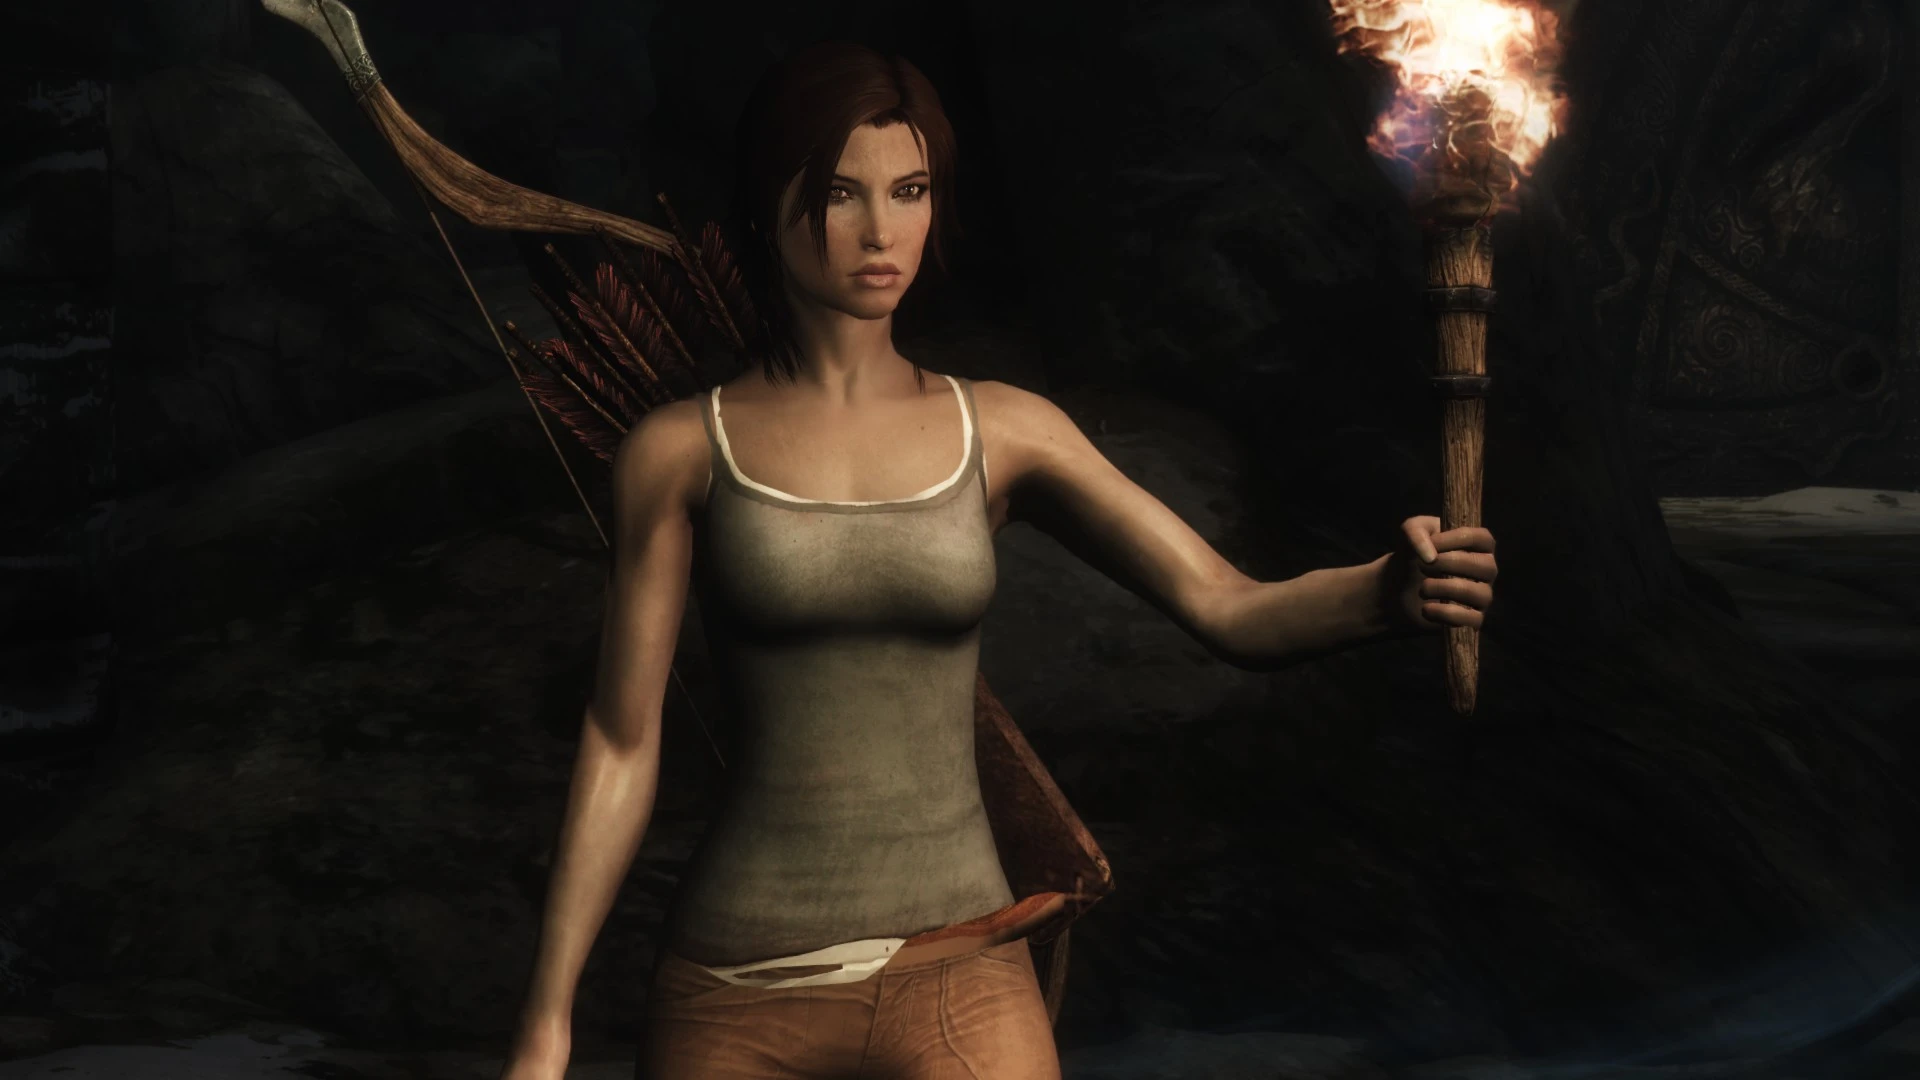 Tomb raider 2013 nude outfit mod sex gallery